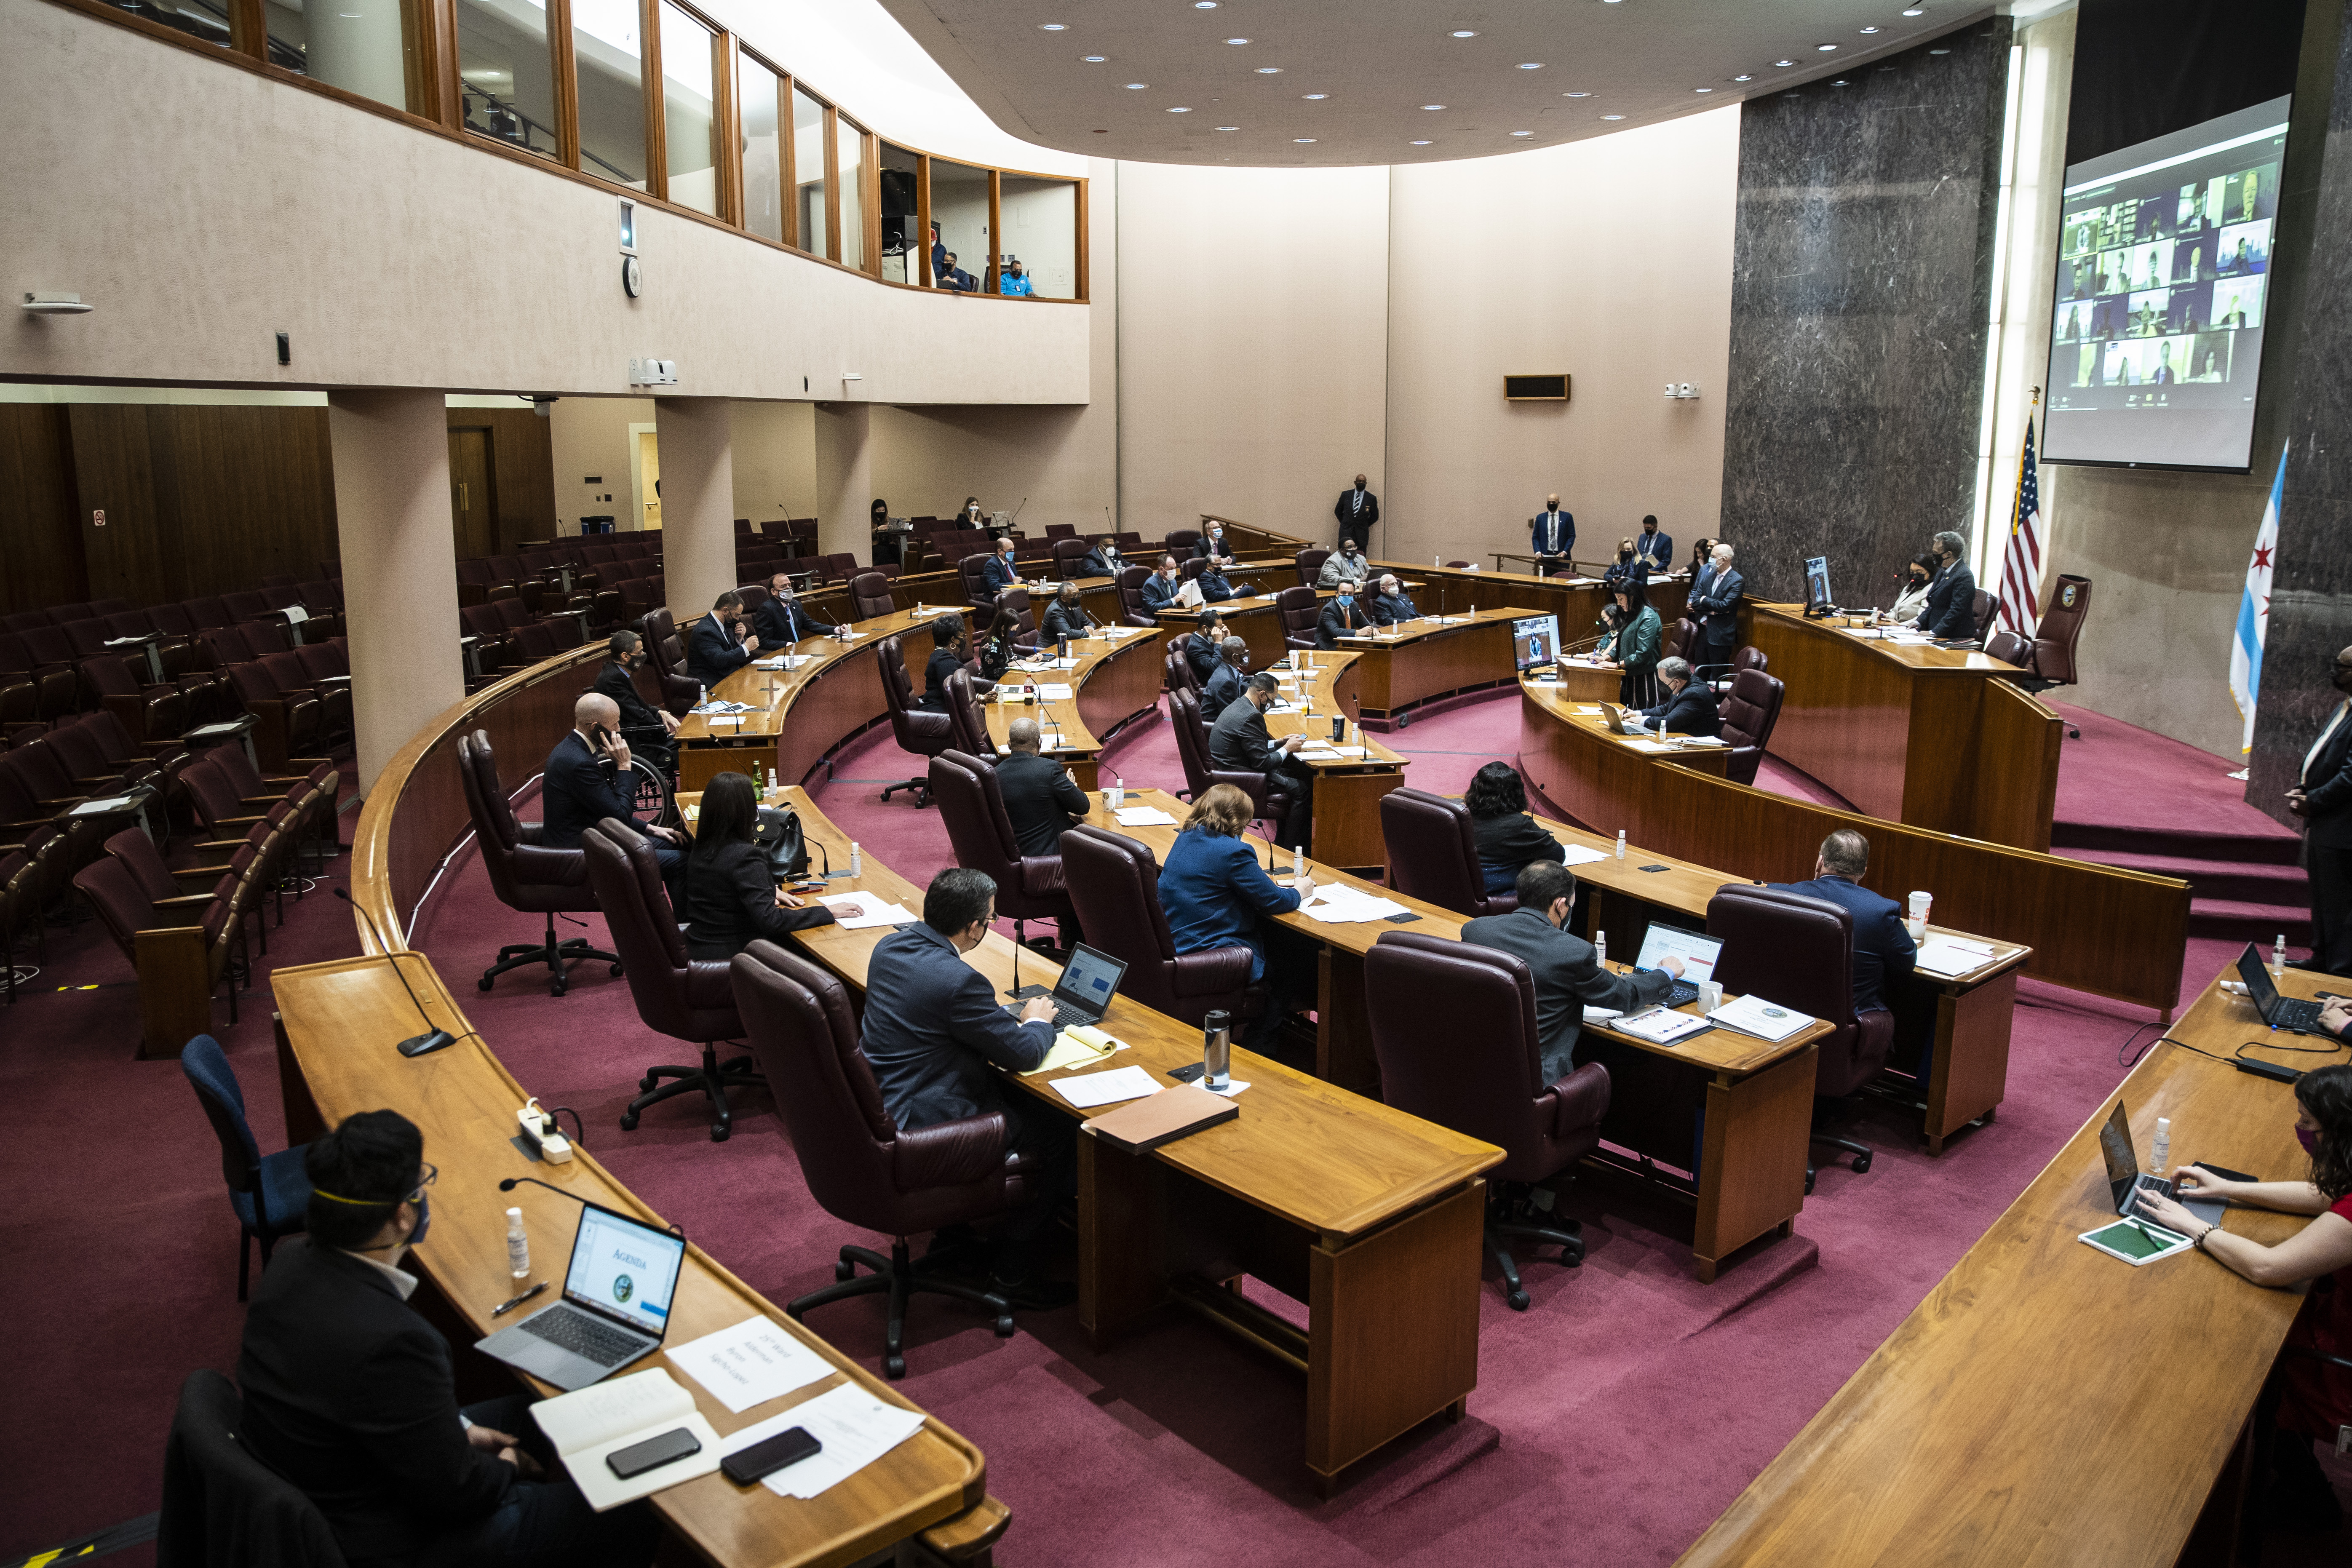 Twenty-eight aldermen attend the Chicago City Council meeting at City Hall in person, while 22 aldermen chose to appear virtually, Wednesday morning, April 21, 2021.